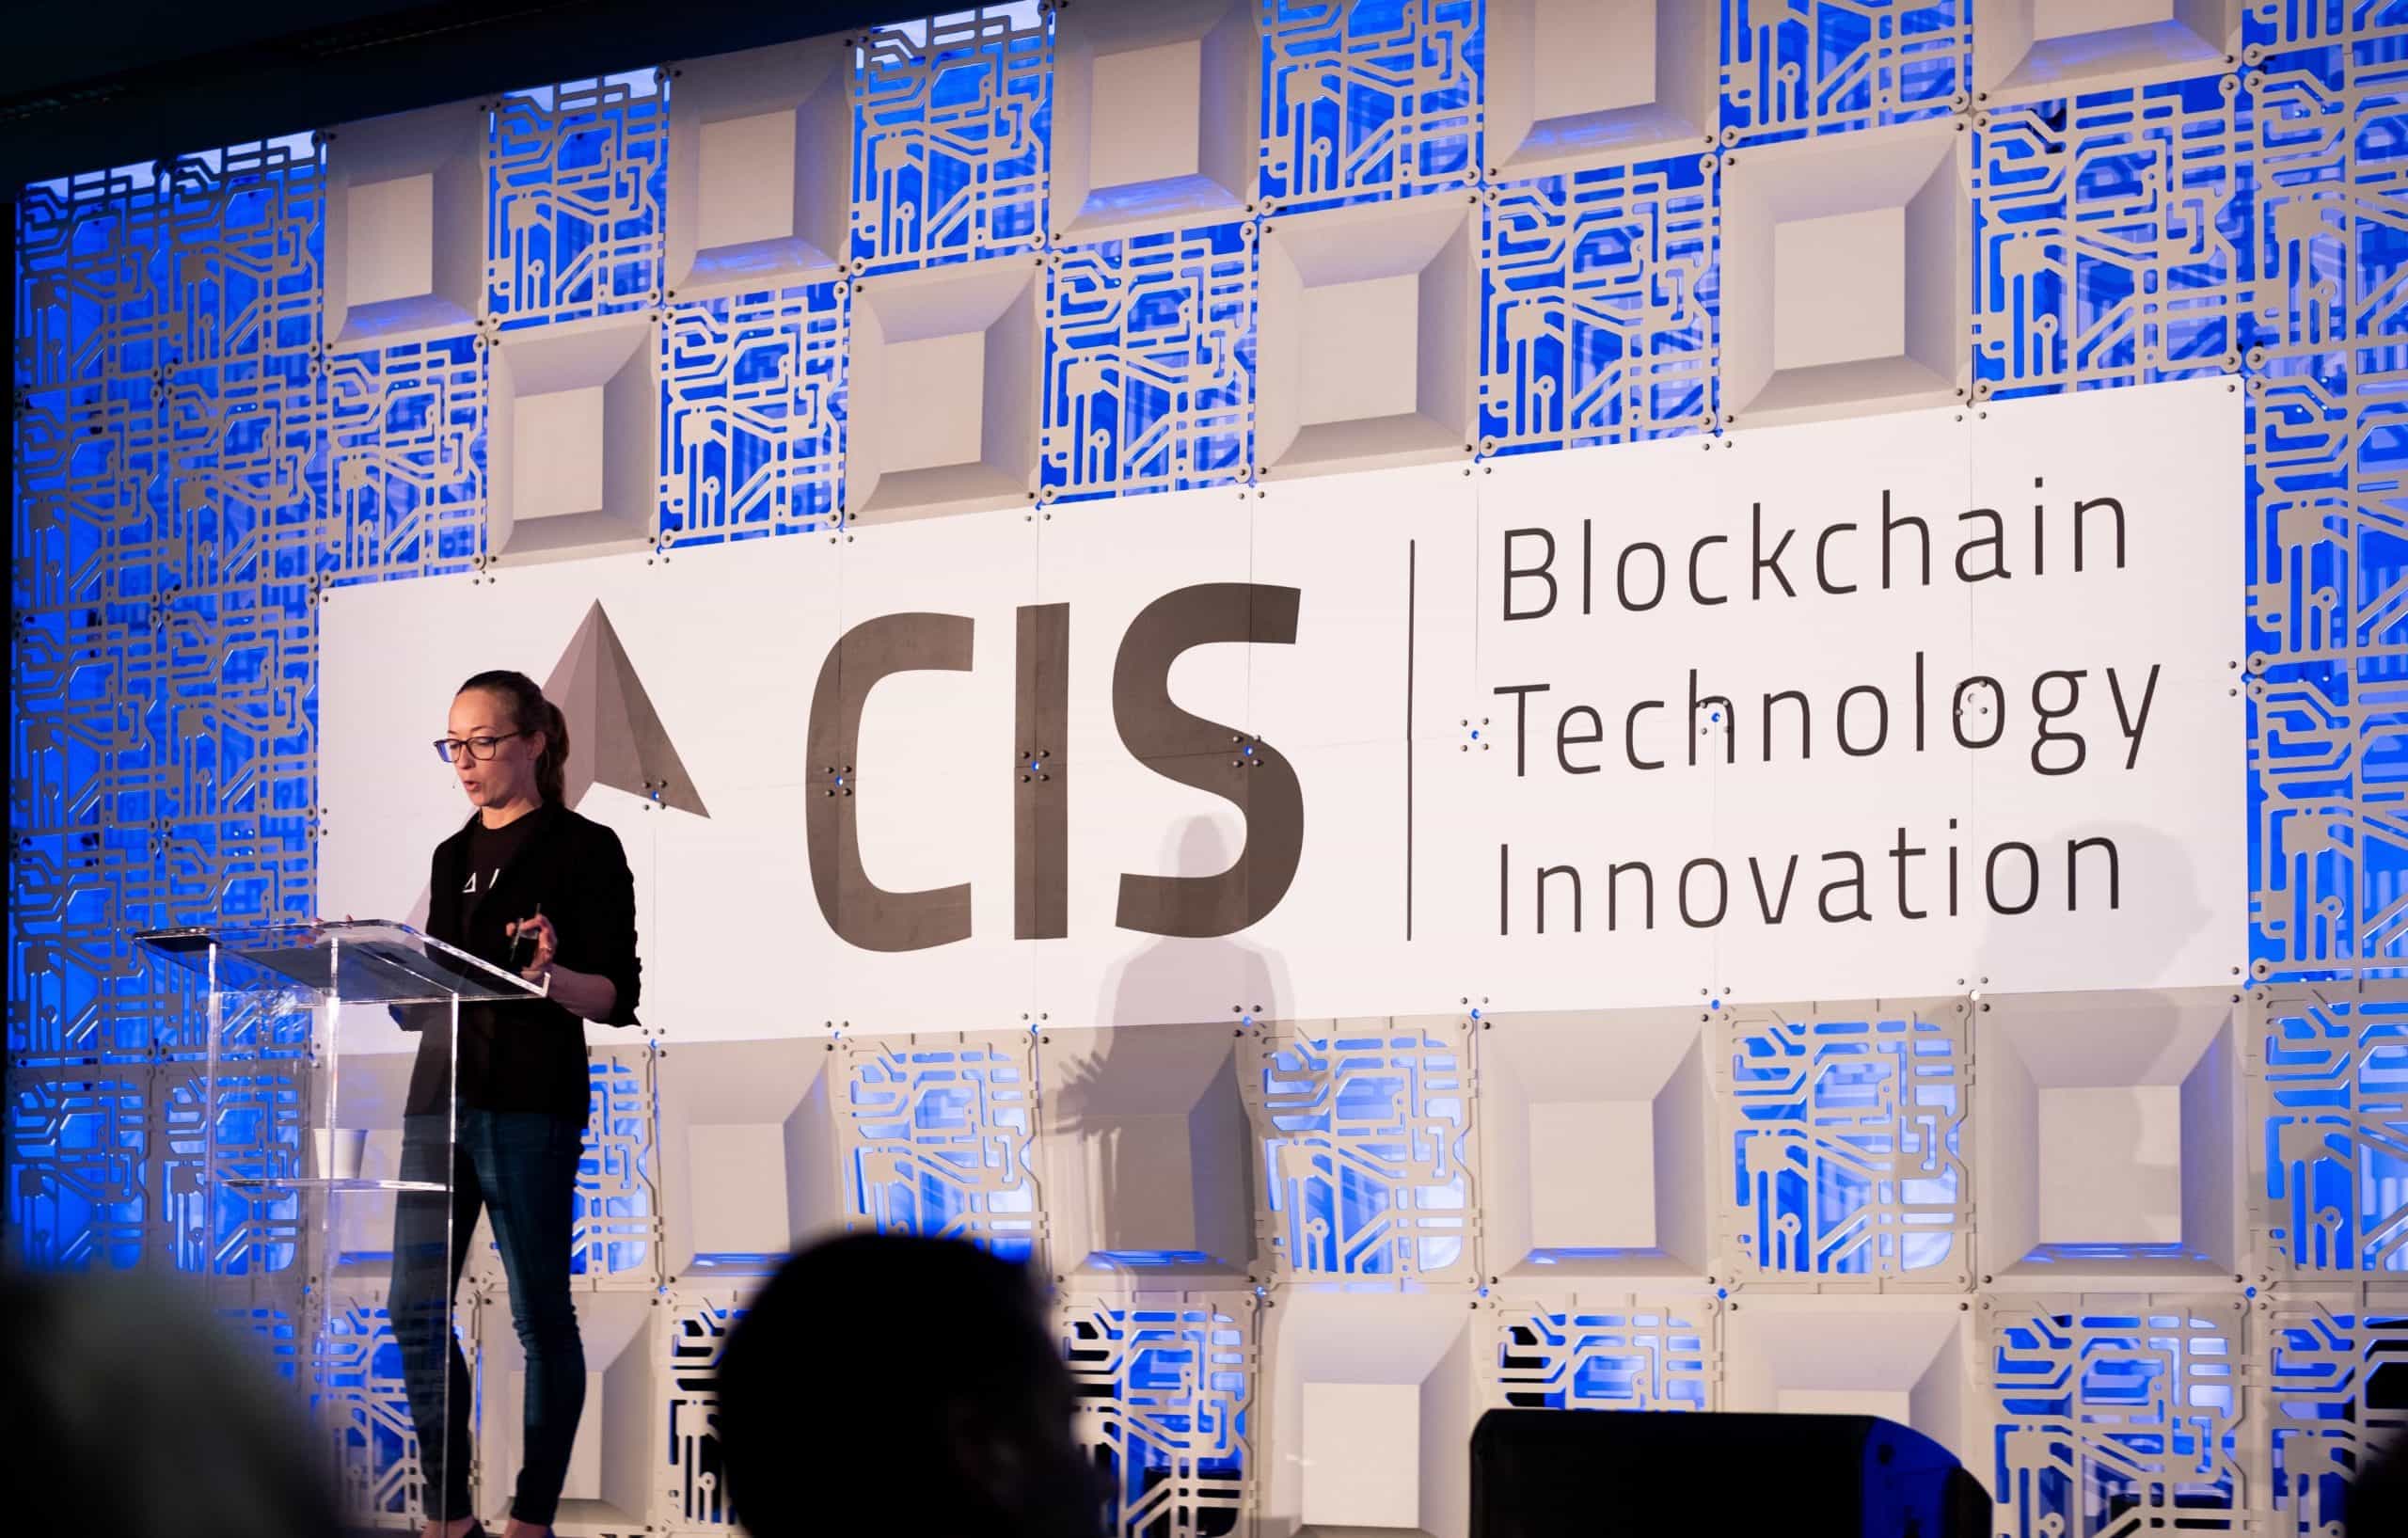 Jenny Shaver speaking at CIS conference about crypto coming into it's own in 2019